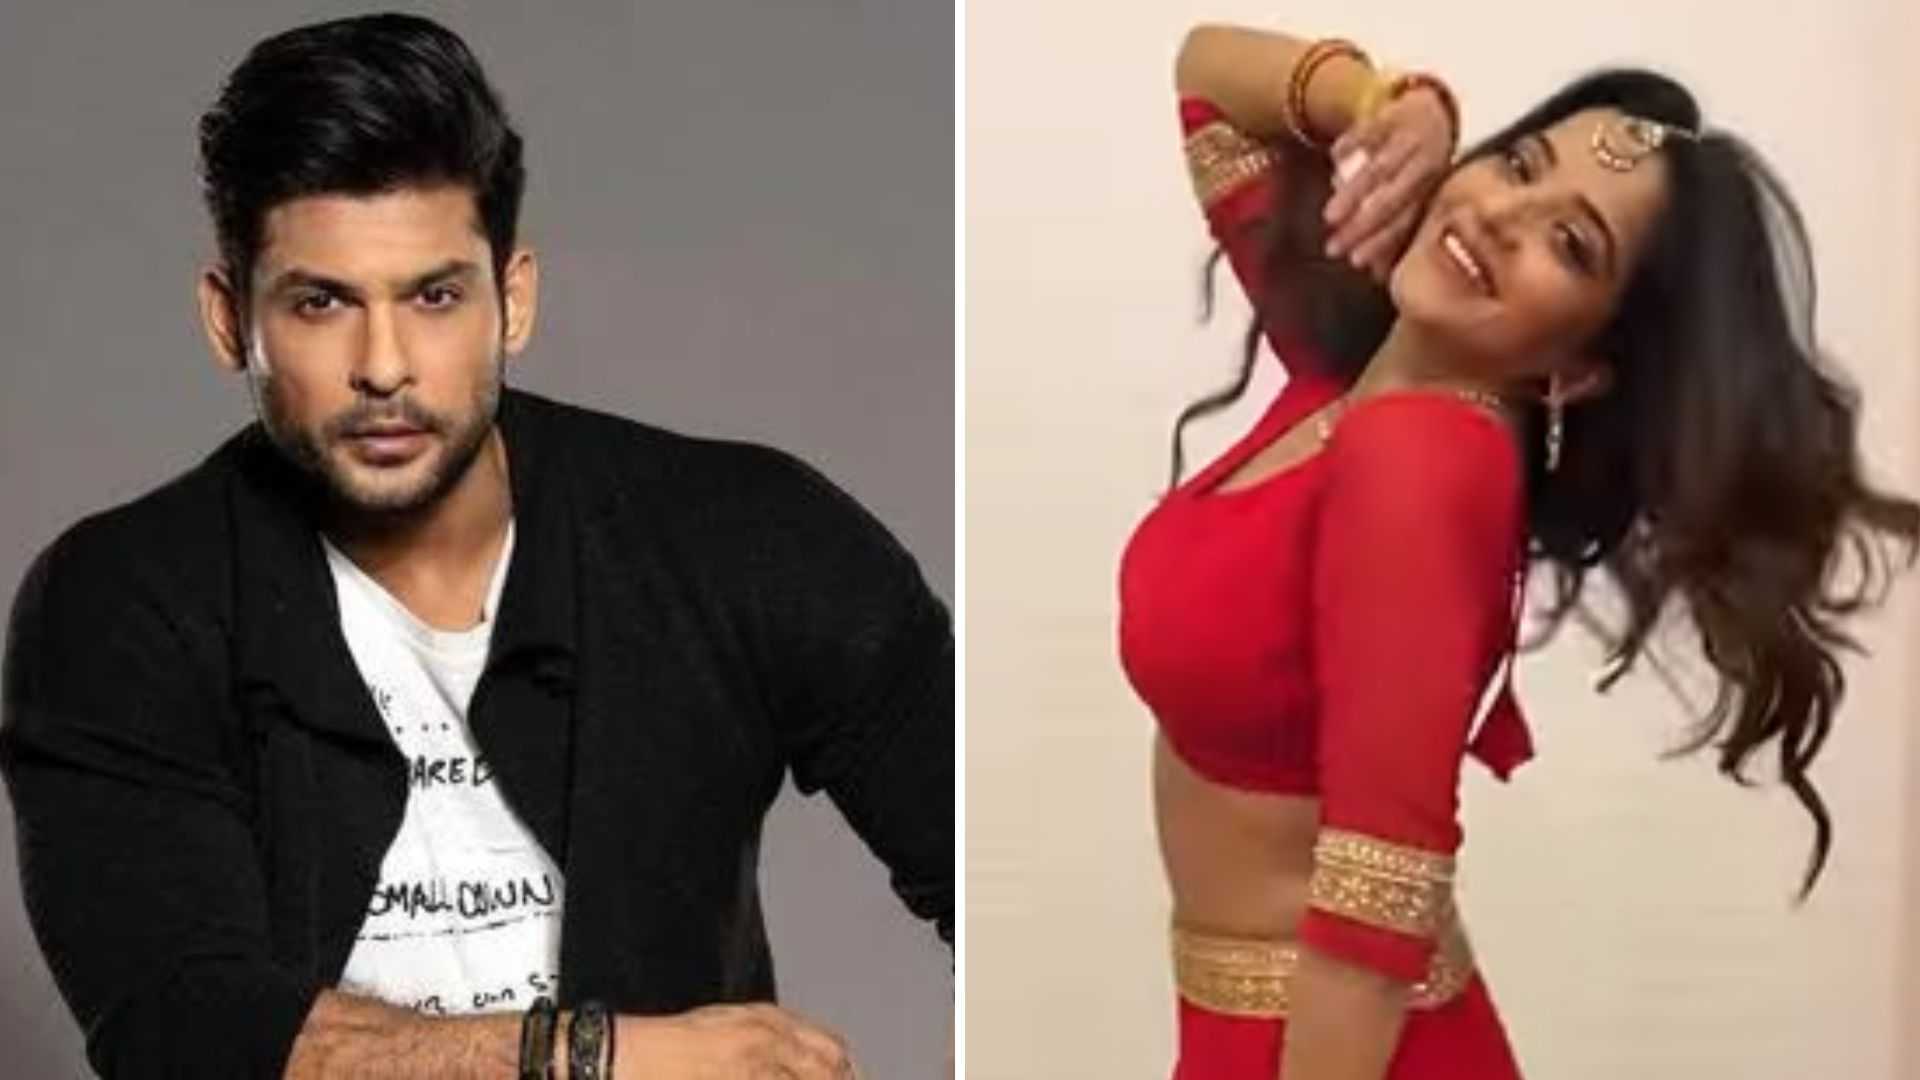 Sidharth Shukla's fans get emotional after Bhojpuri star Monalisa shares a clip of her throwback music video with him